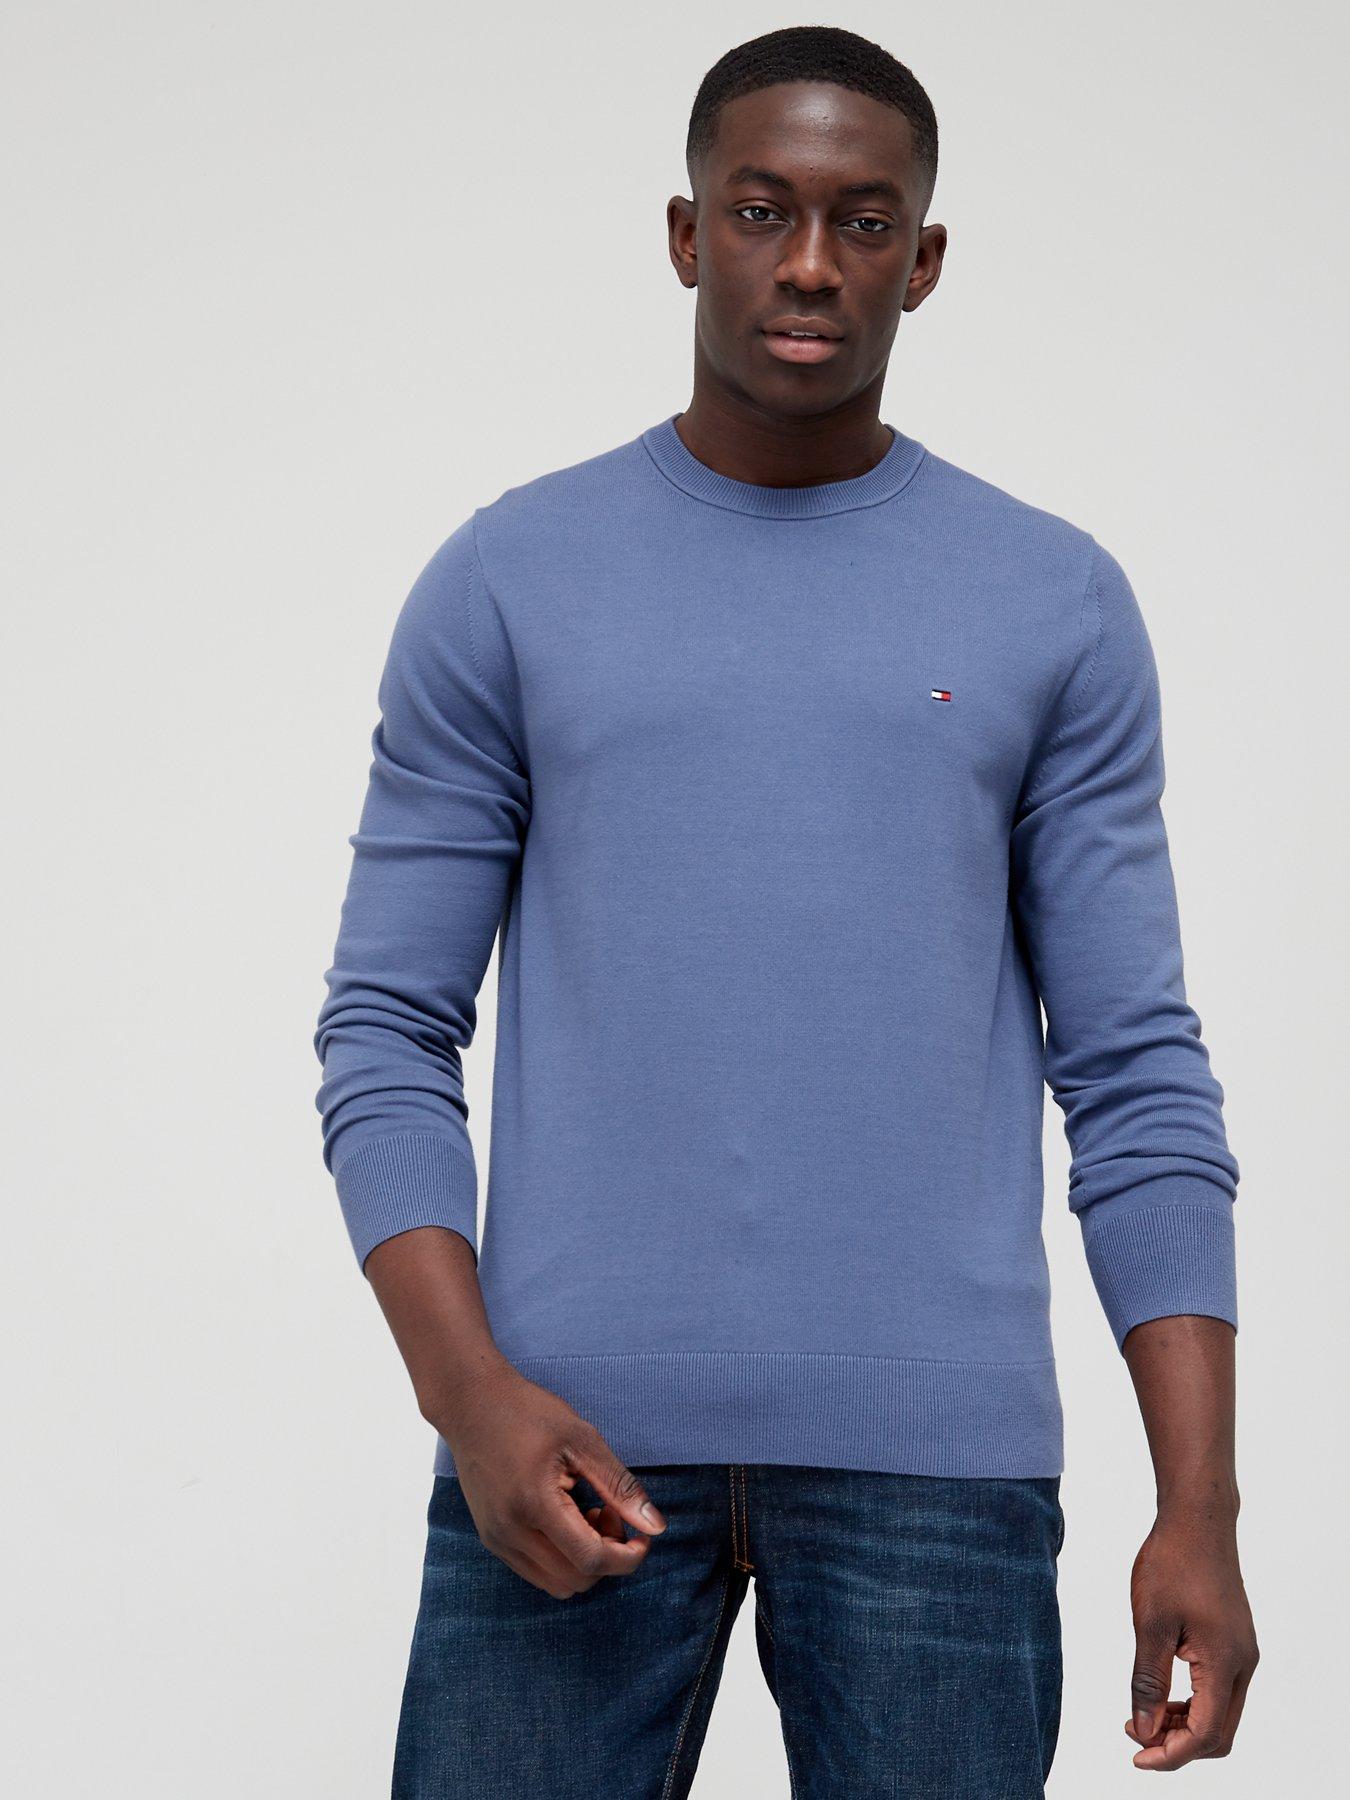 Tommy Hilfiger 1985 Knitted Jumper - Faded Indigo | very.co.uk